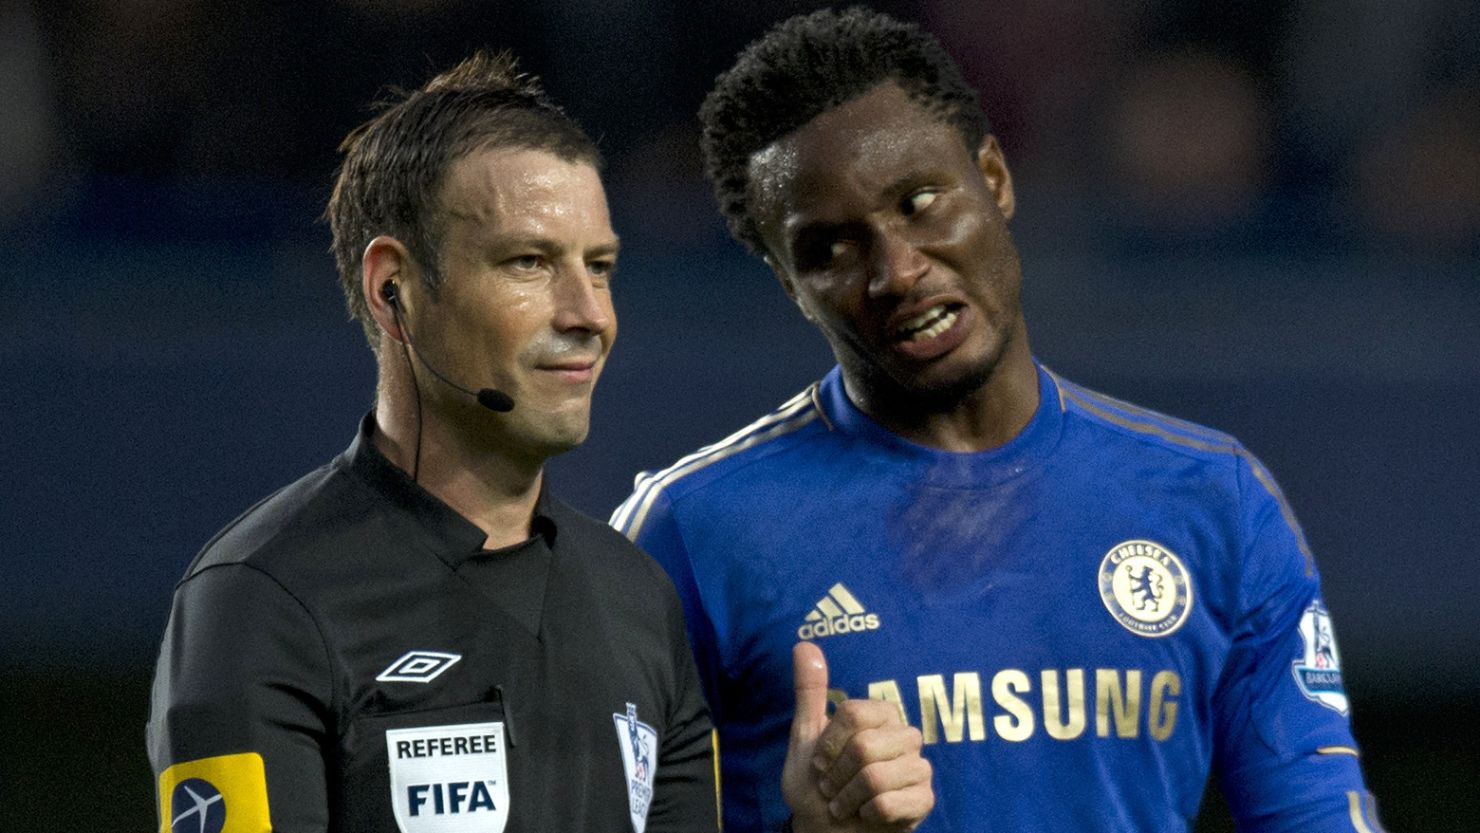 Chelsea's John Obi Mikel talks with Mark Clattenburg during October's Premier League clash between Chelsea and Manchester United